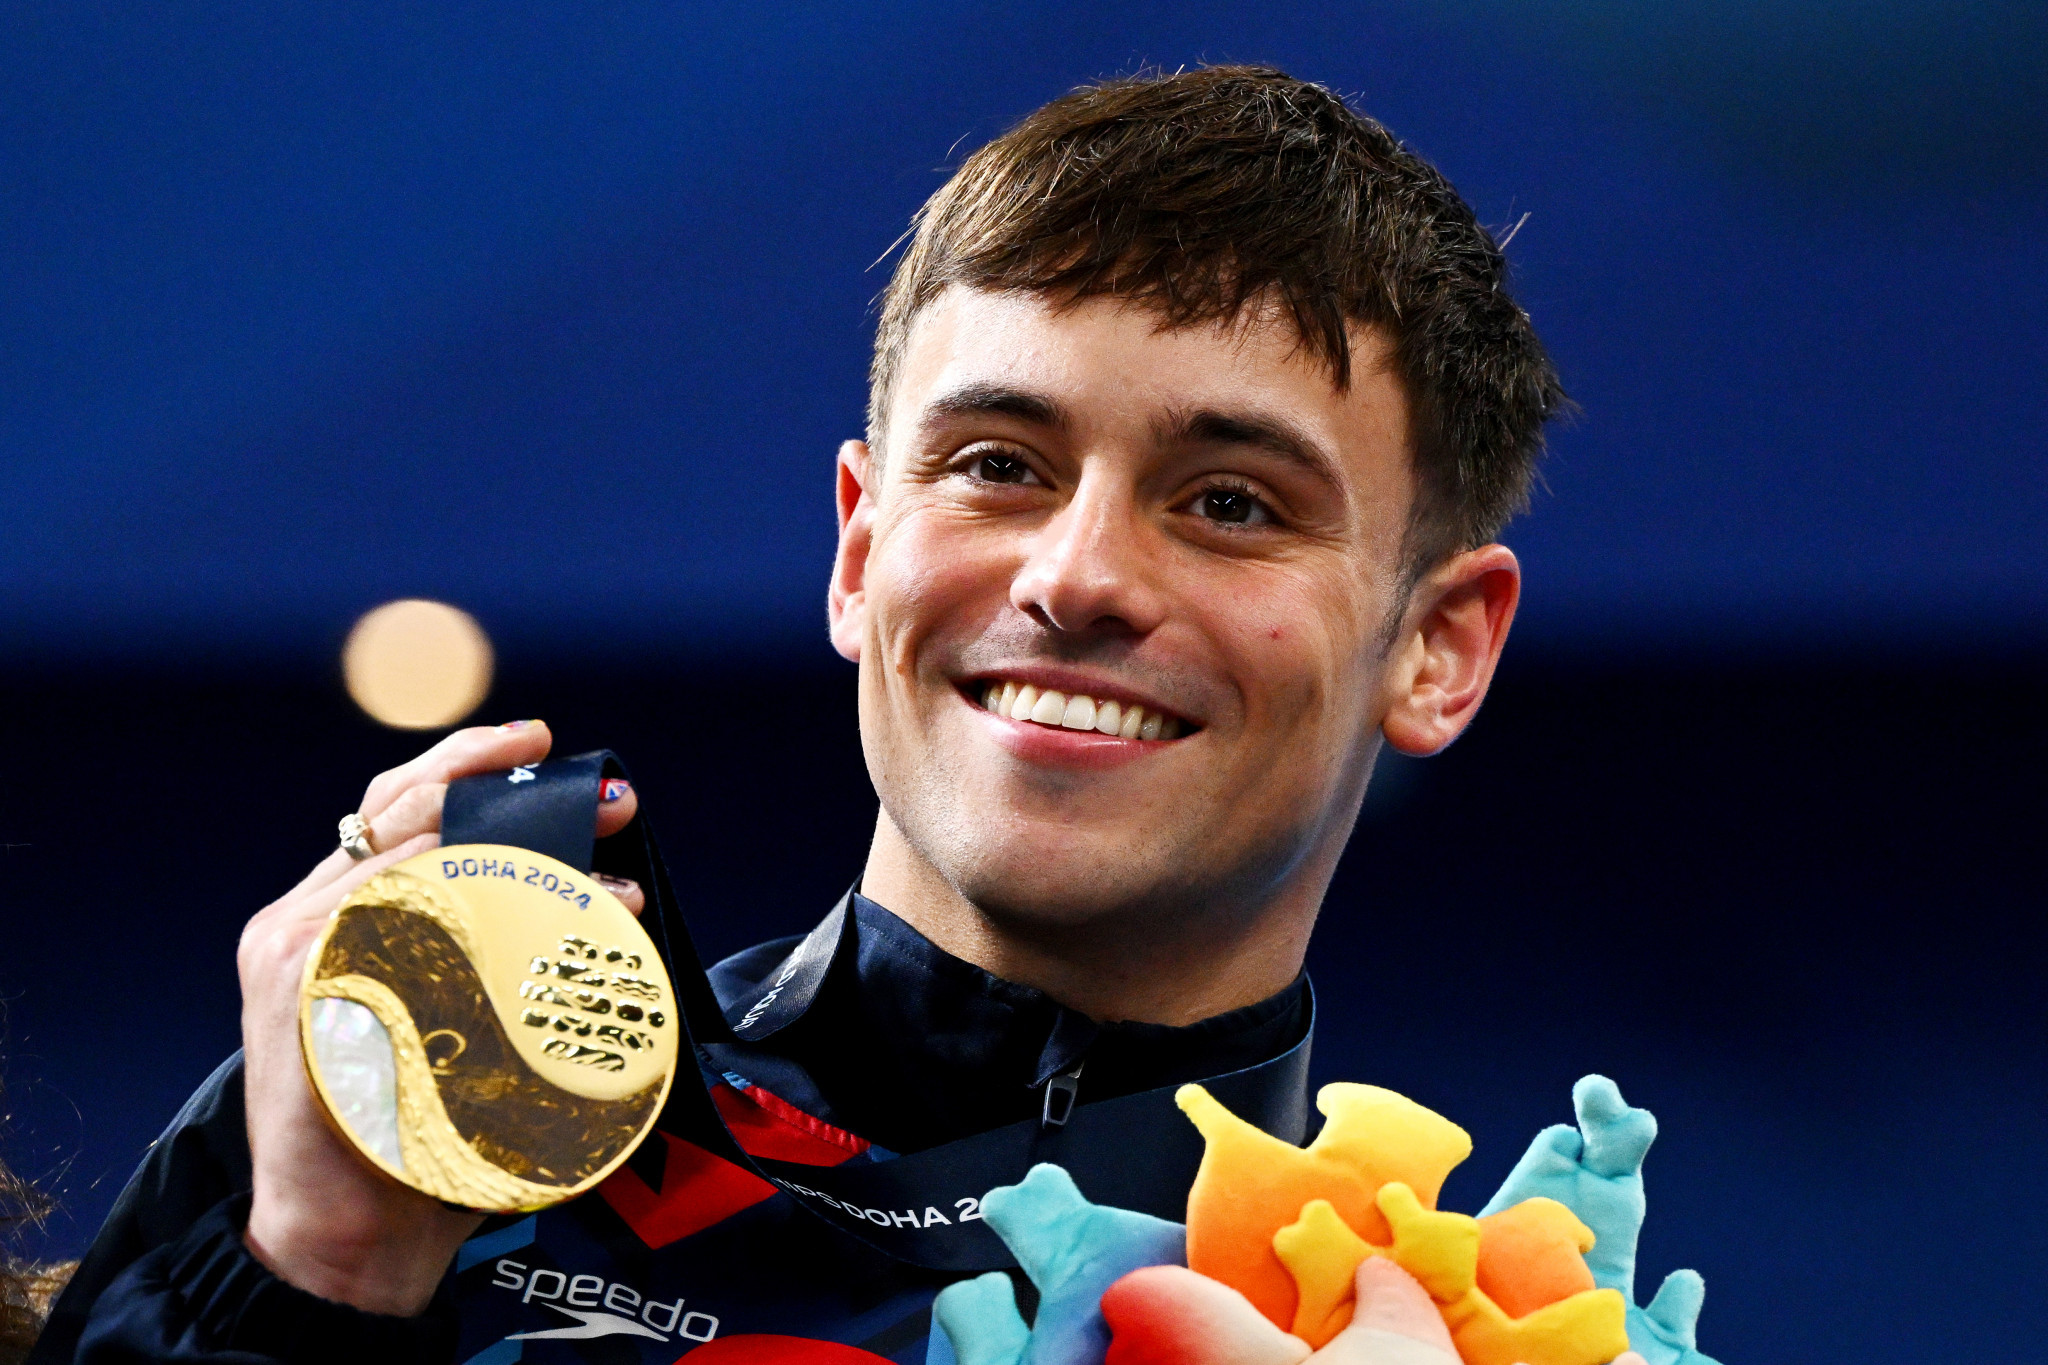 British diver Daley has praised the Aquatics Centre in Paris ahead of the upcoming Olympics. GETTY IMAGES